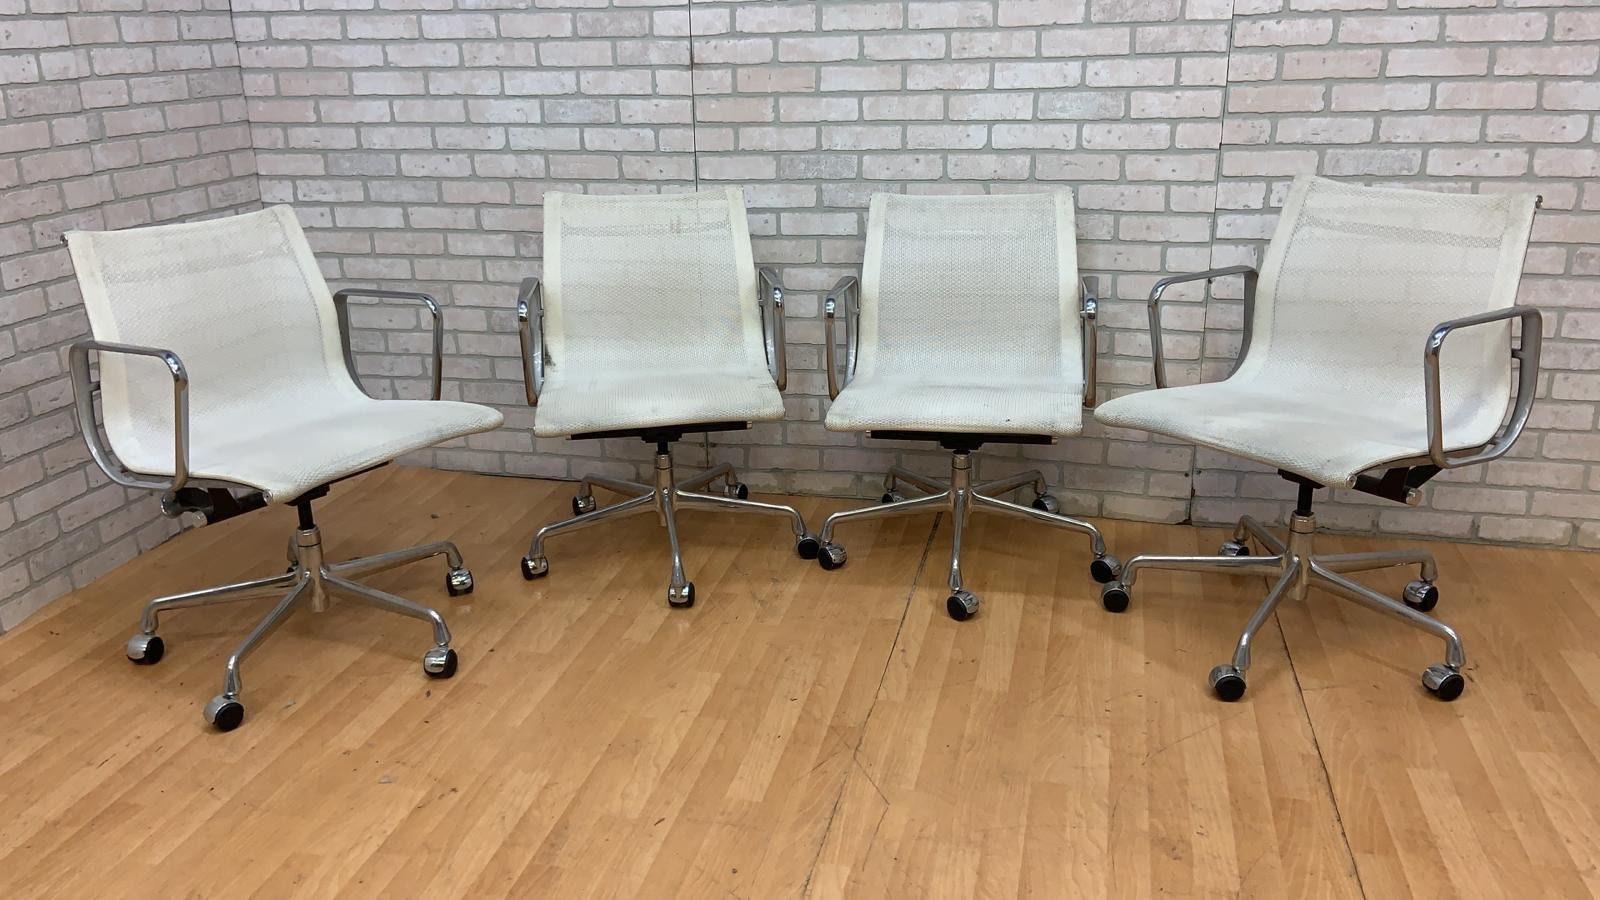 Mid-Century Modern Herman Miller style low back white mesh office chairs - set of 4

These chairs features a white mesh sling seating area, high back, adjustable lightweight aluminum frame and casters for 360-degree swivel. Extremely comfortable.